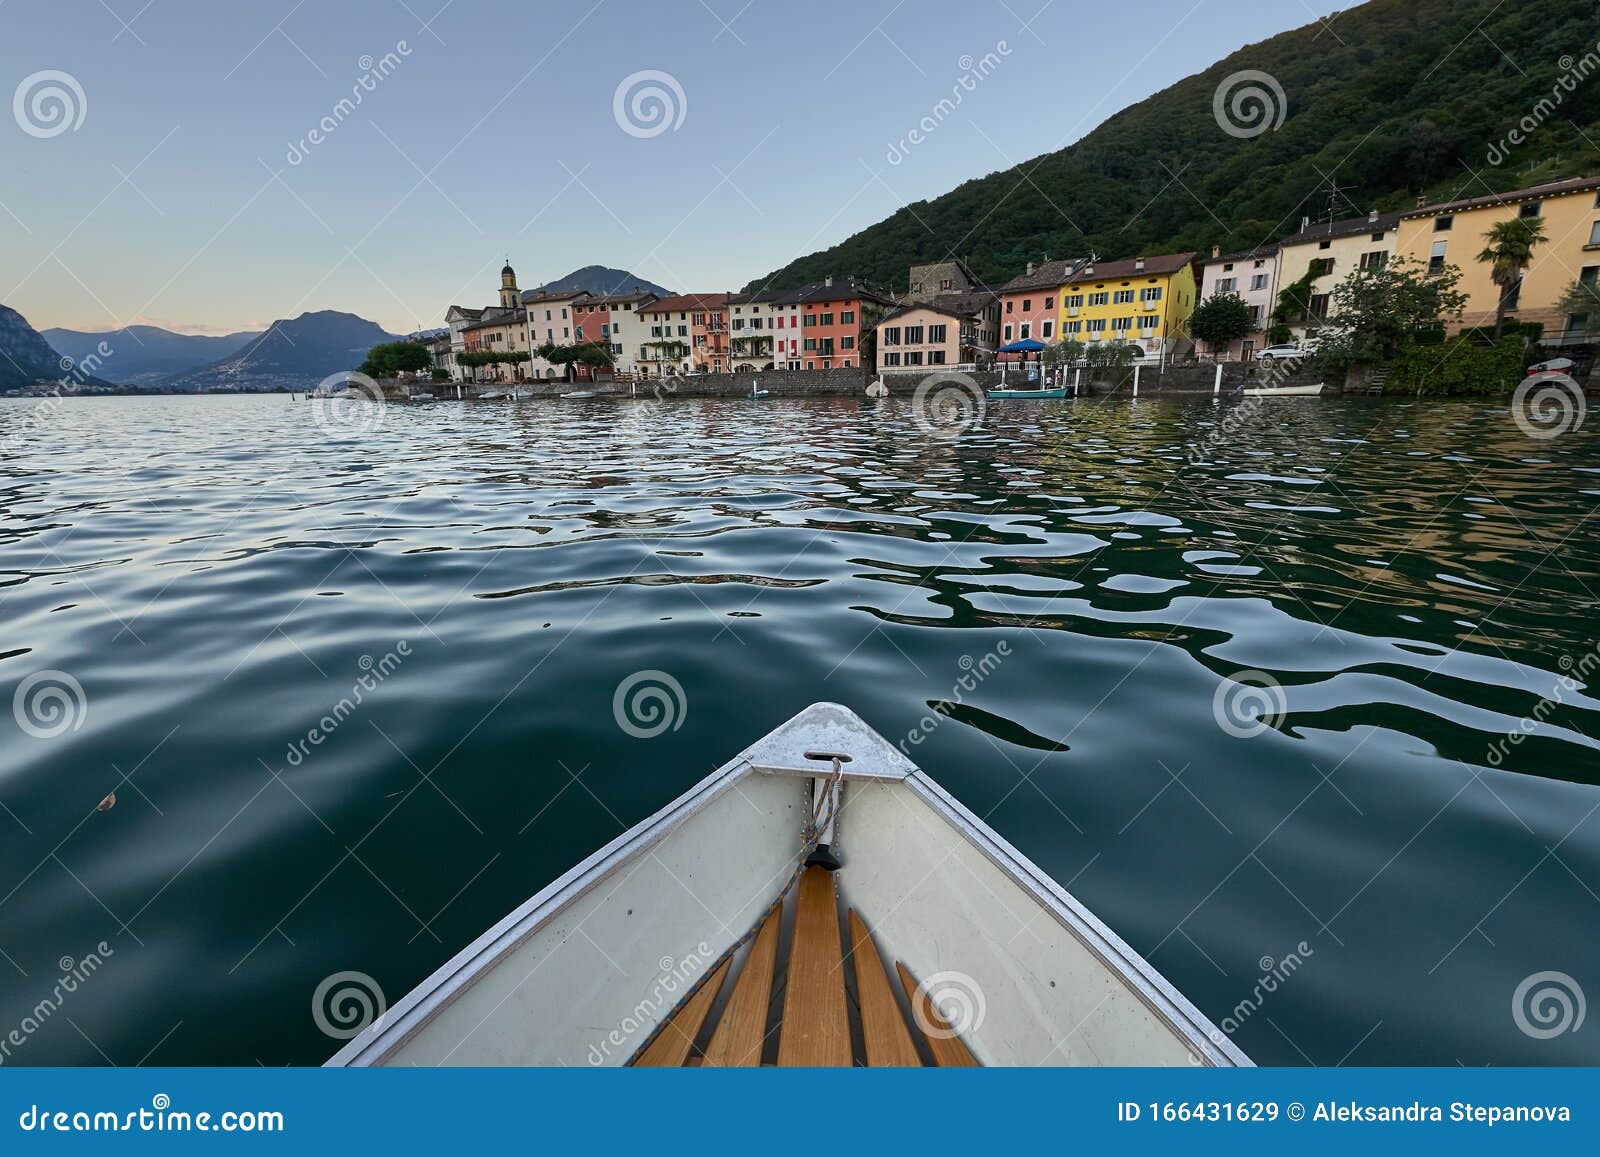 a boat bobs on the waves of a lake in switzerland, approaching the coastline